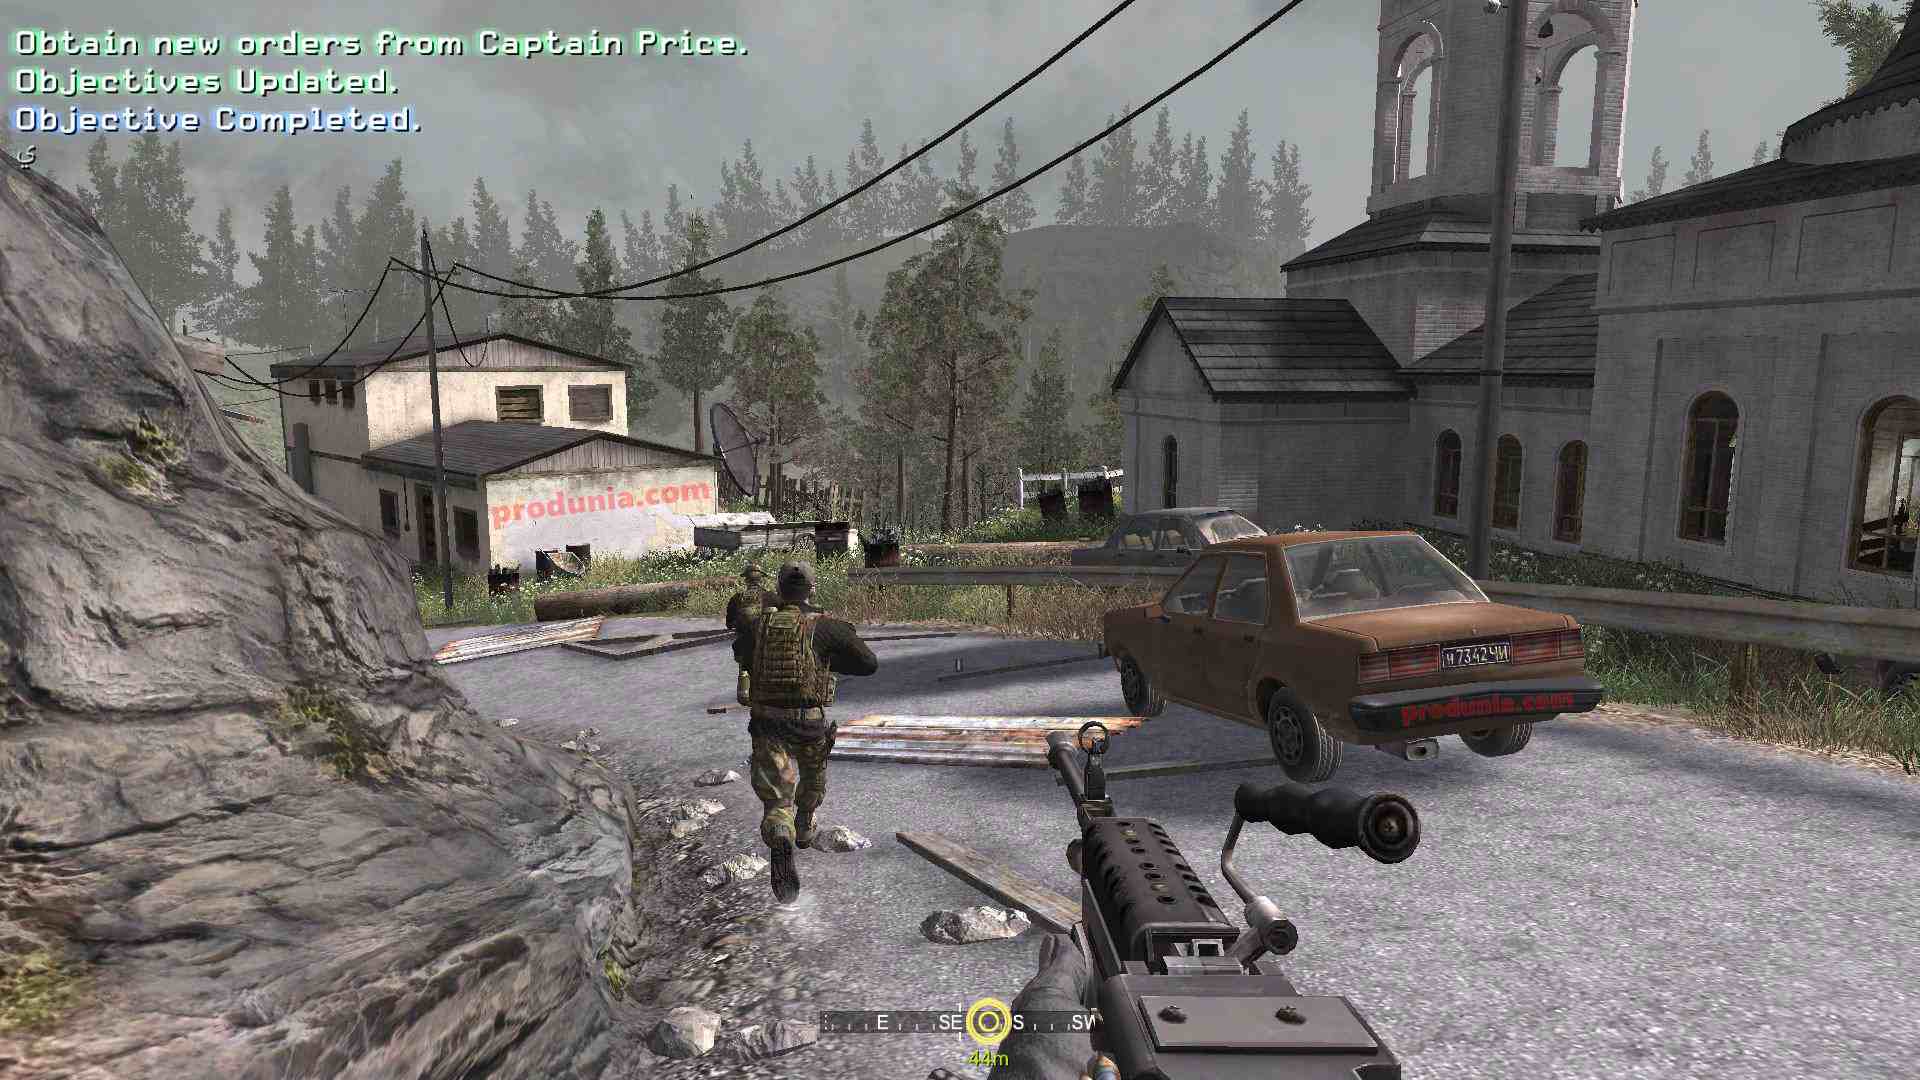 call of duty modern warfare download highly compressed